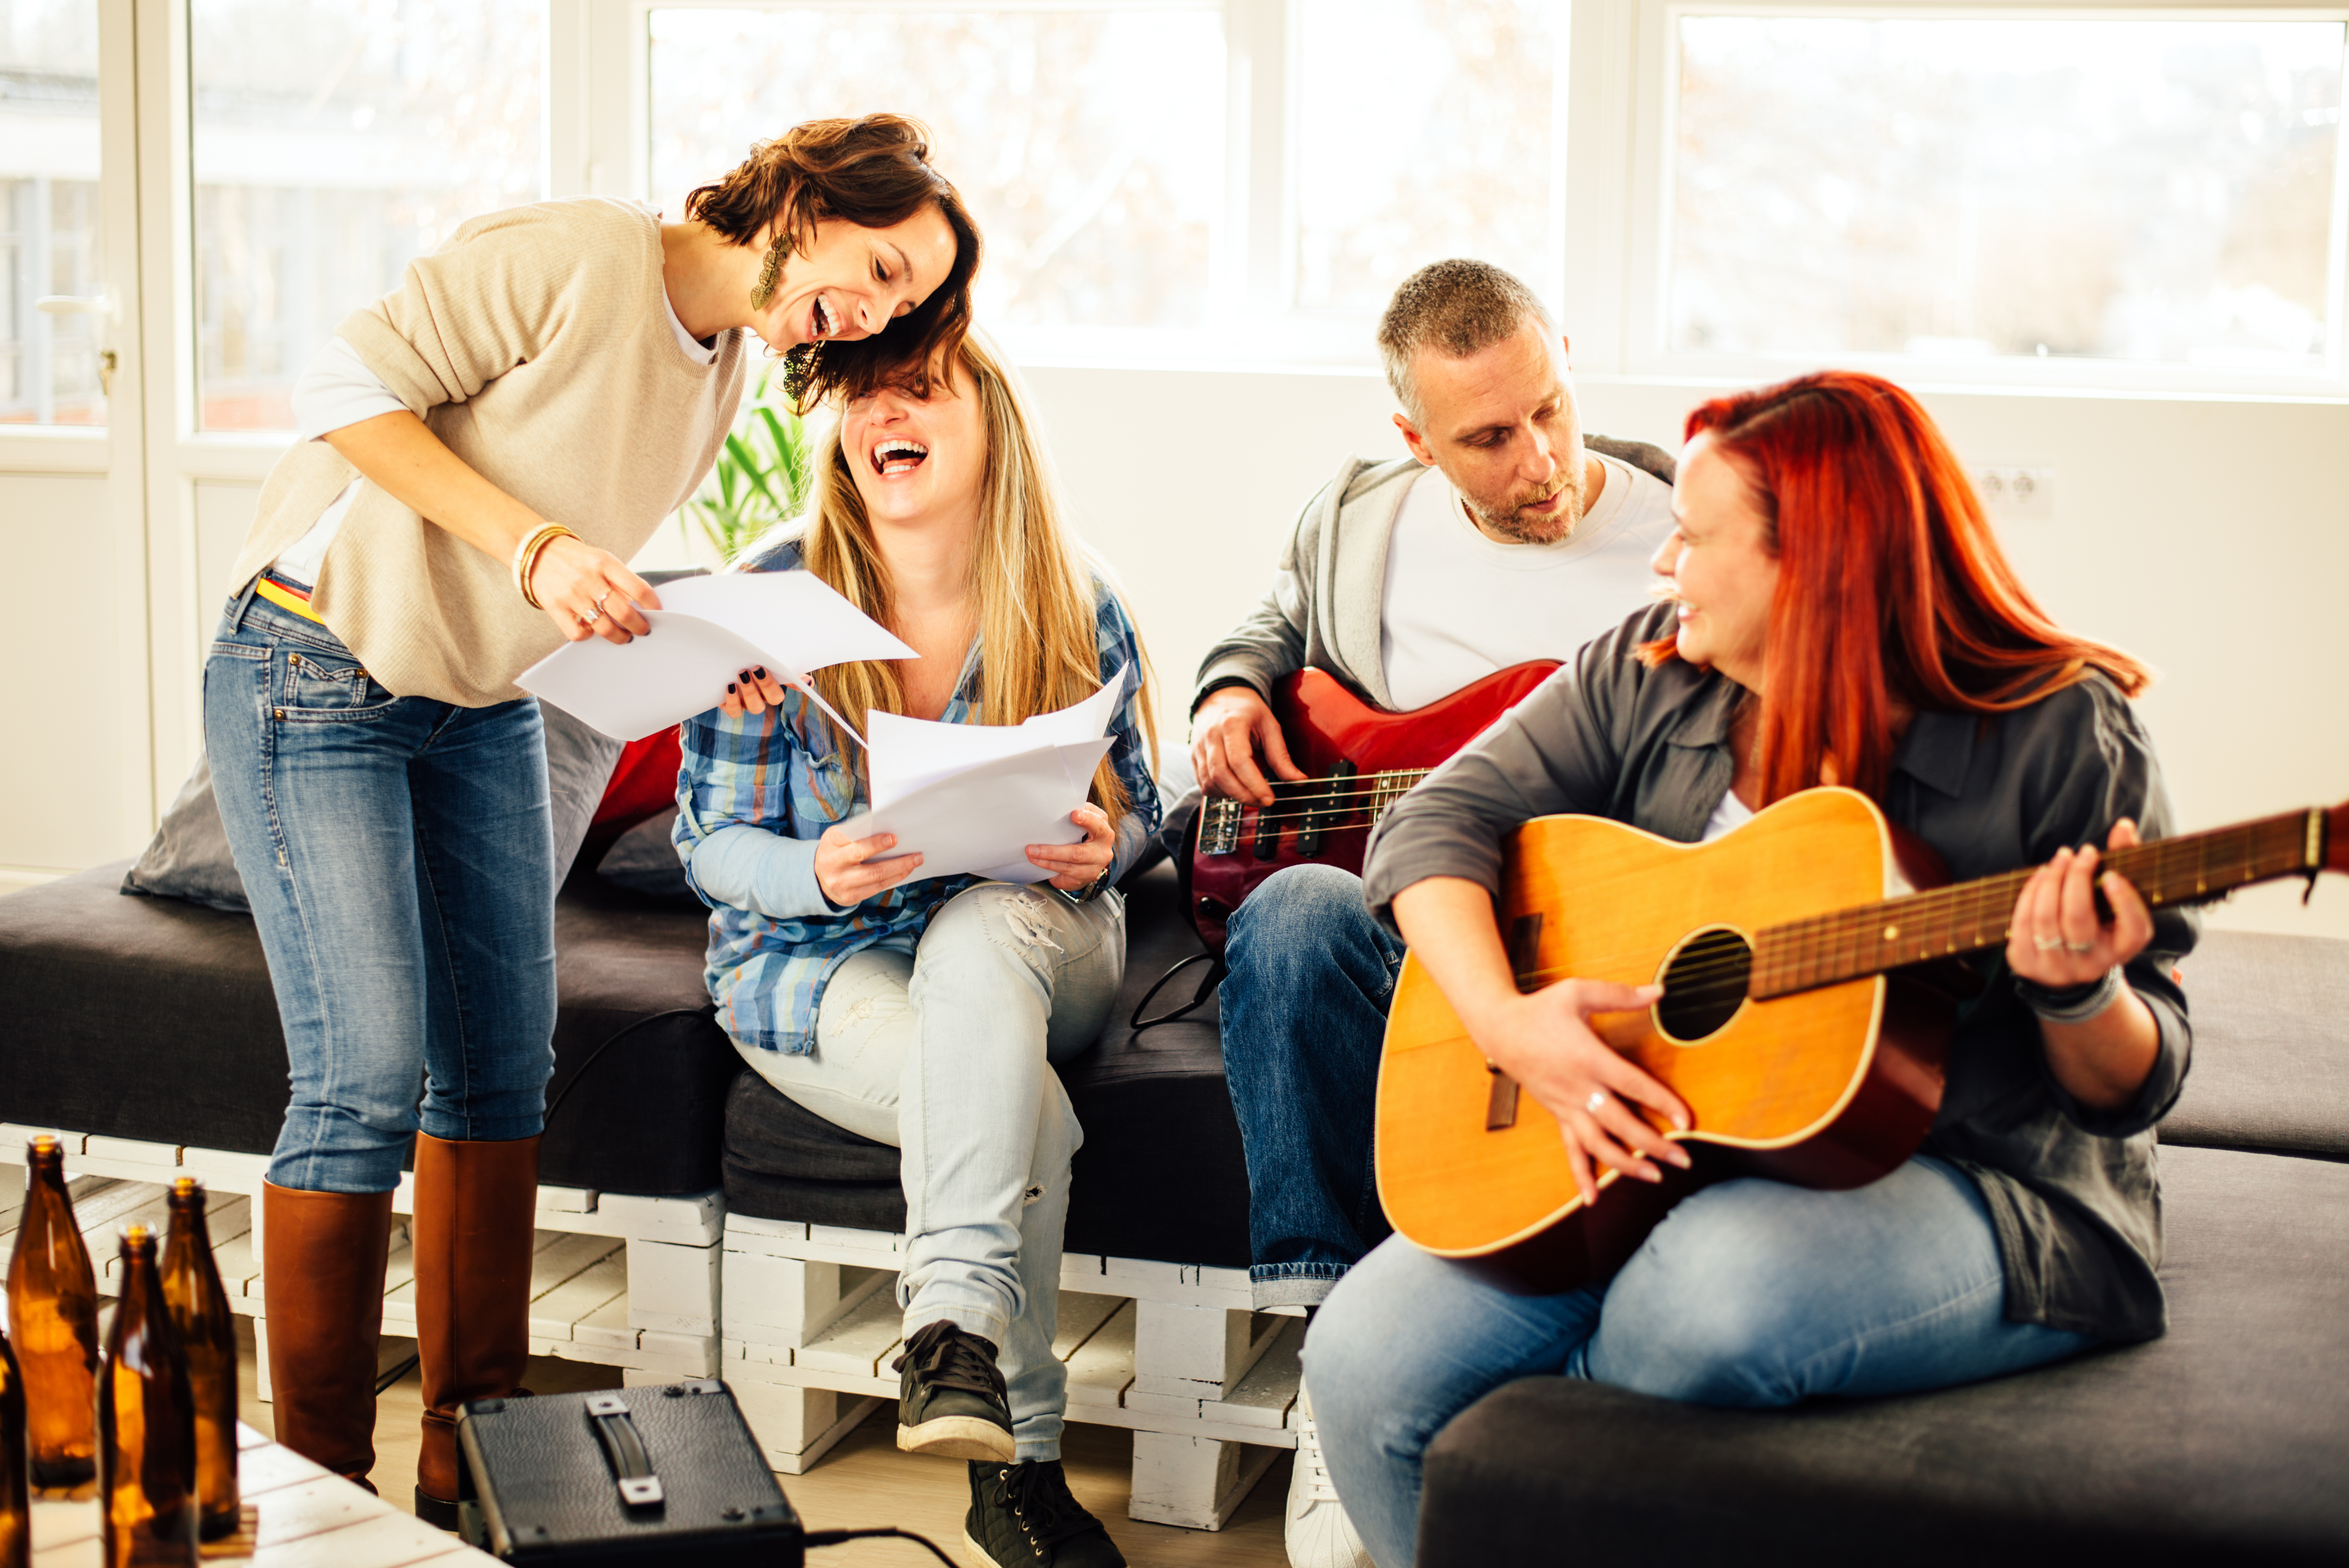 8 Things You Should Do If You Want To Learn Music As Adults | Liberty Park Music